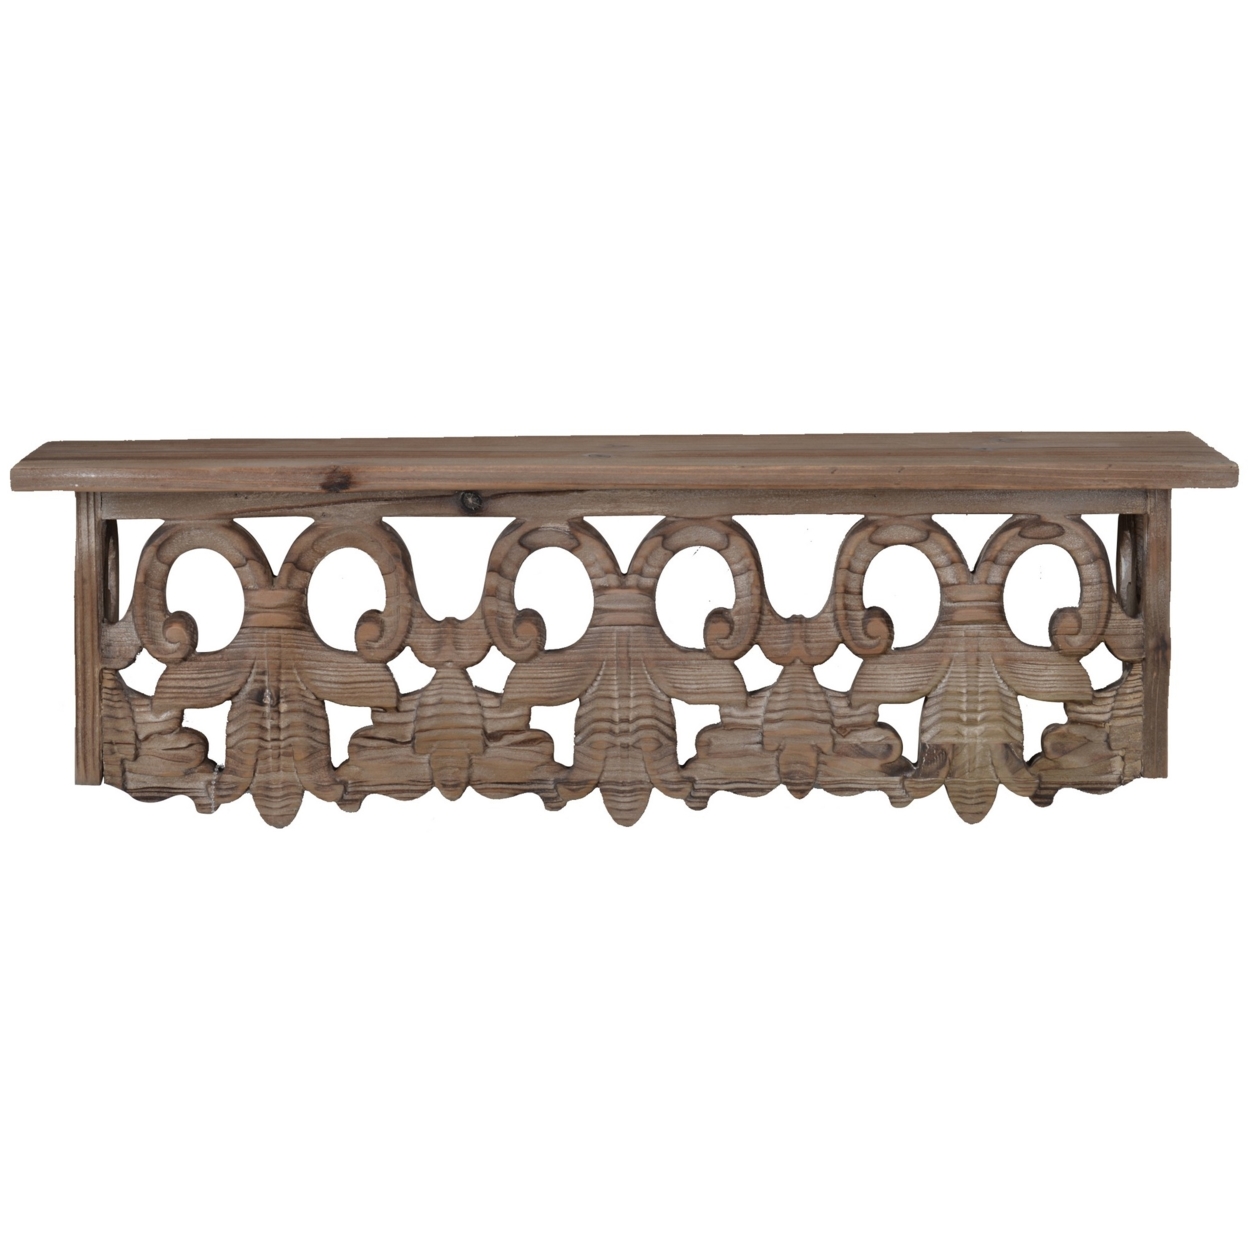 23.5 Inches Wooden Wall Shelf With Scrollwork, Small, Brown- Saltoro Sherpi